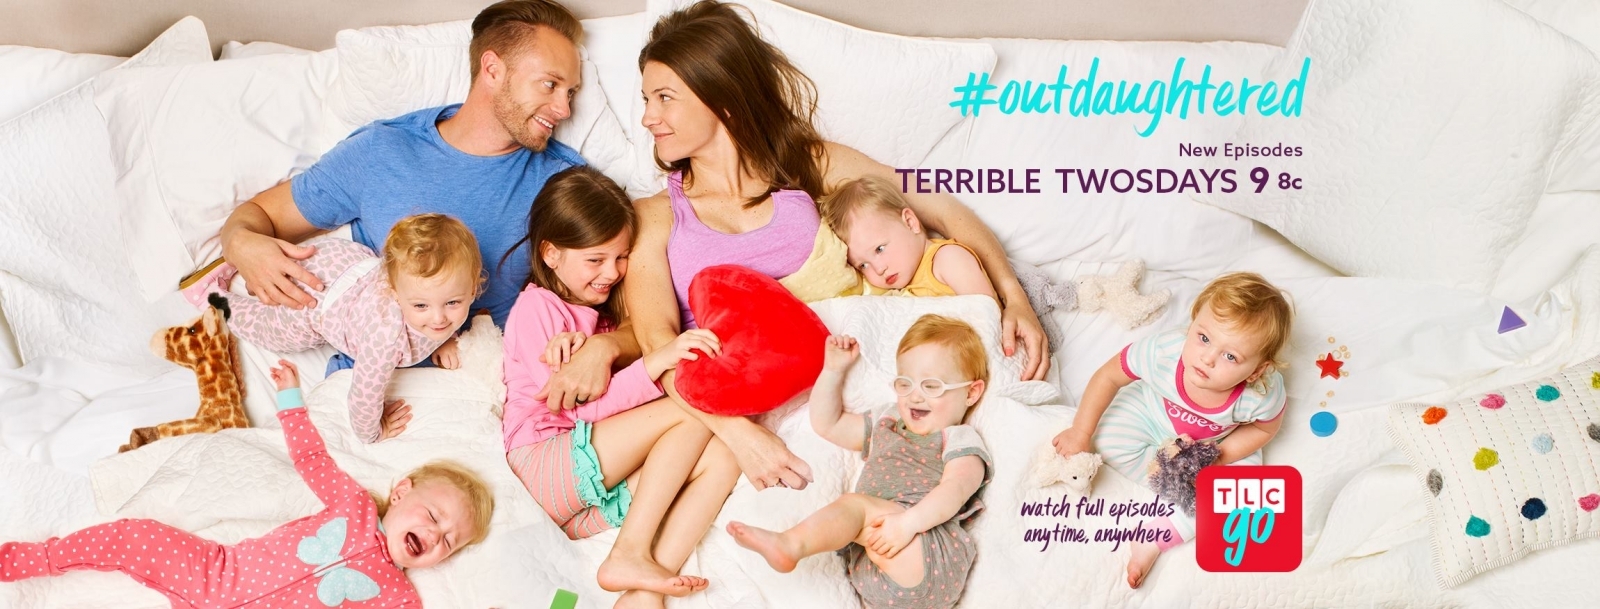 Why Fans Think 'OutDaughtered' Star Danielle Busby Is A Liar